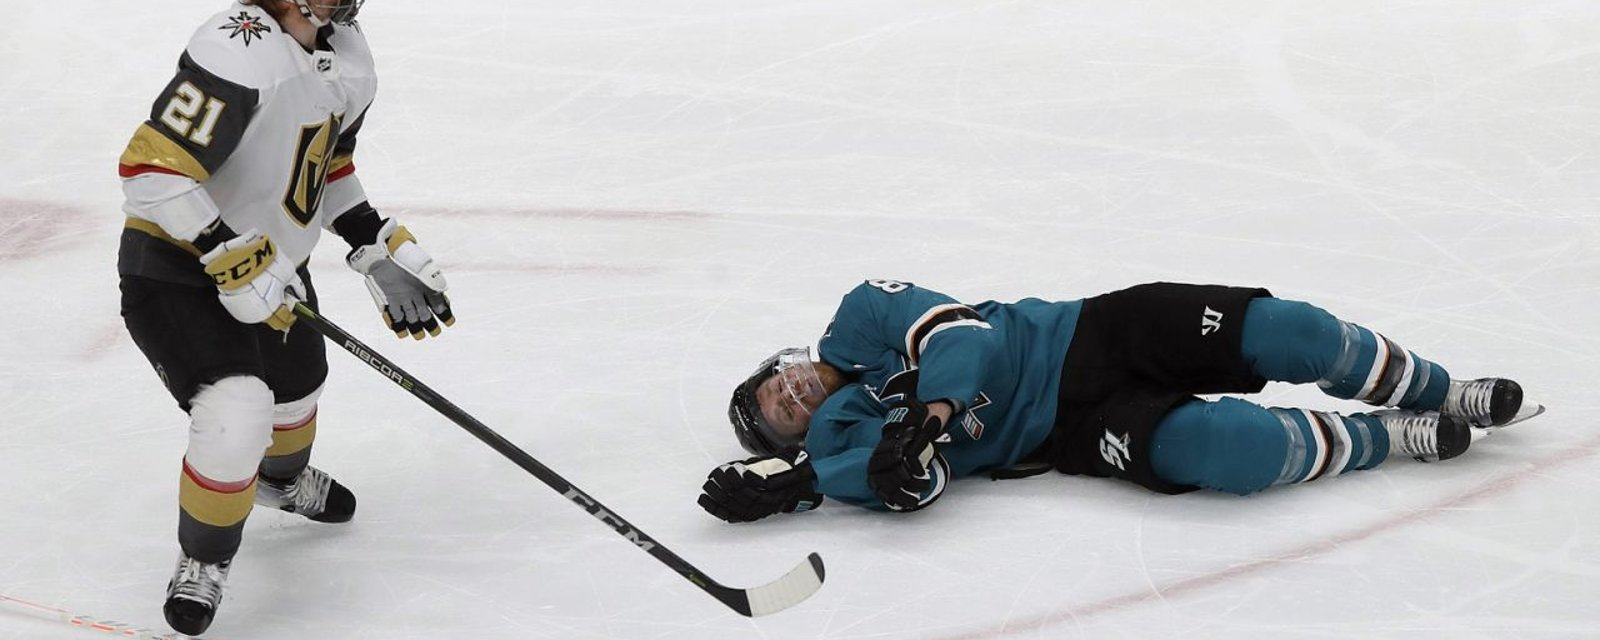 Pavelski admits the officials blew the call in Game 7.